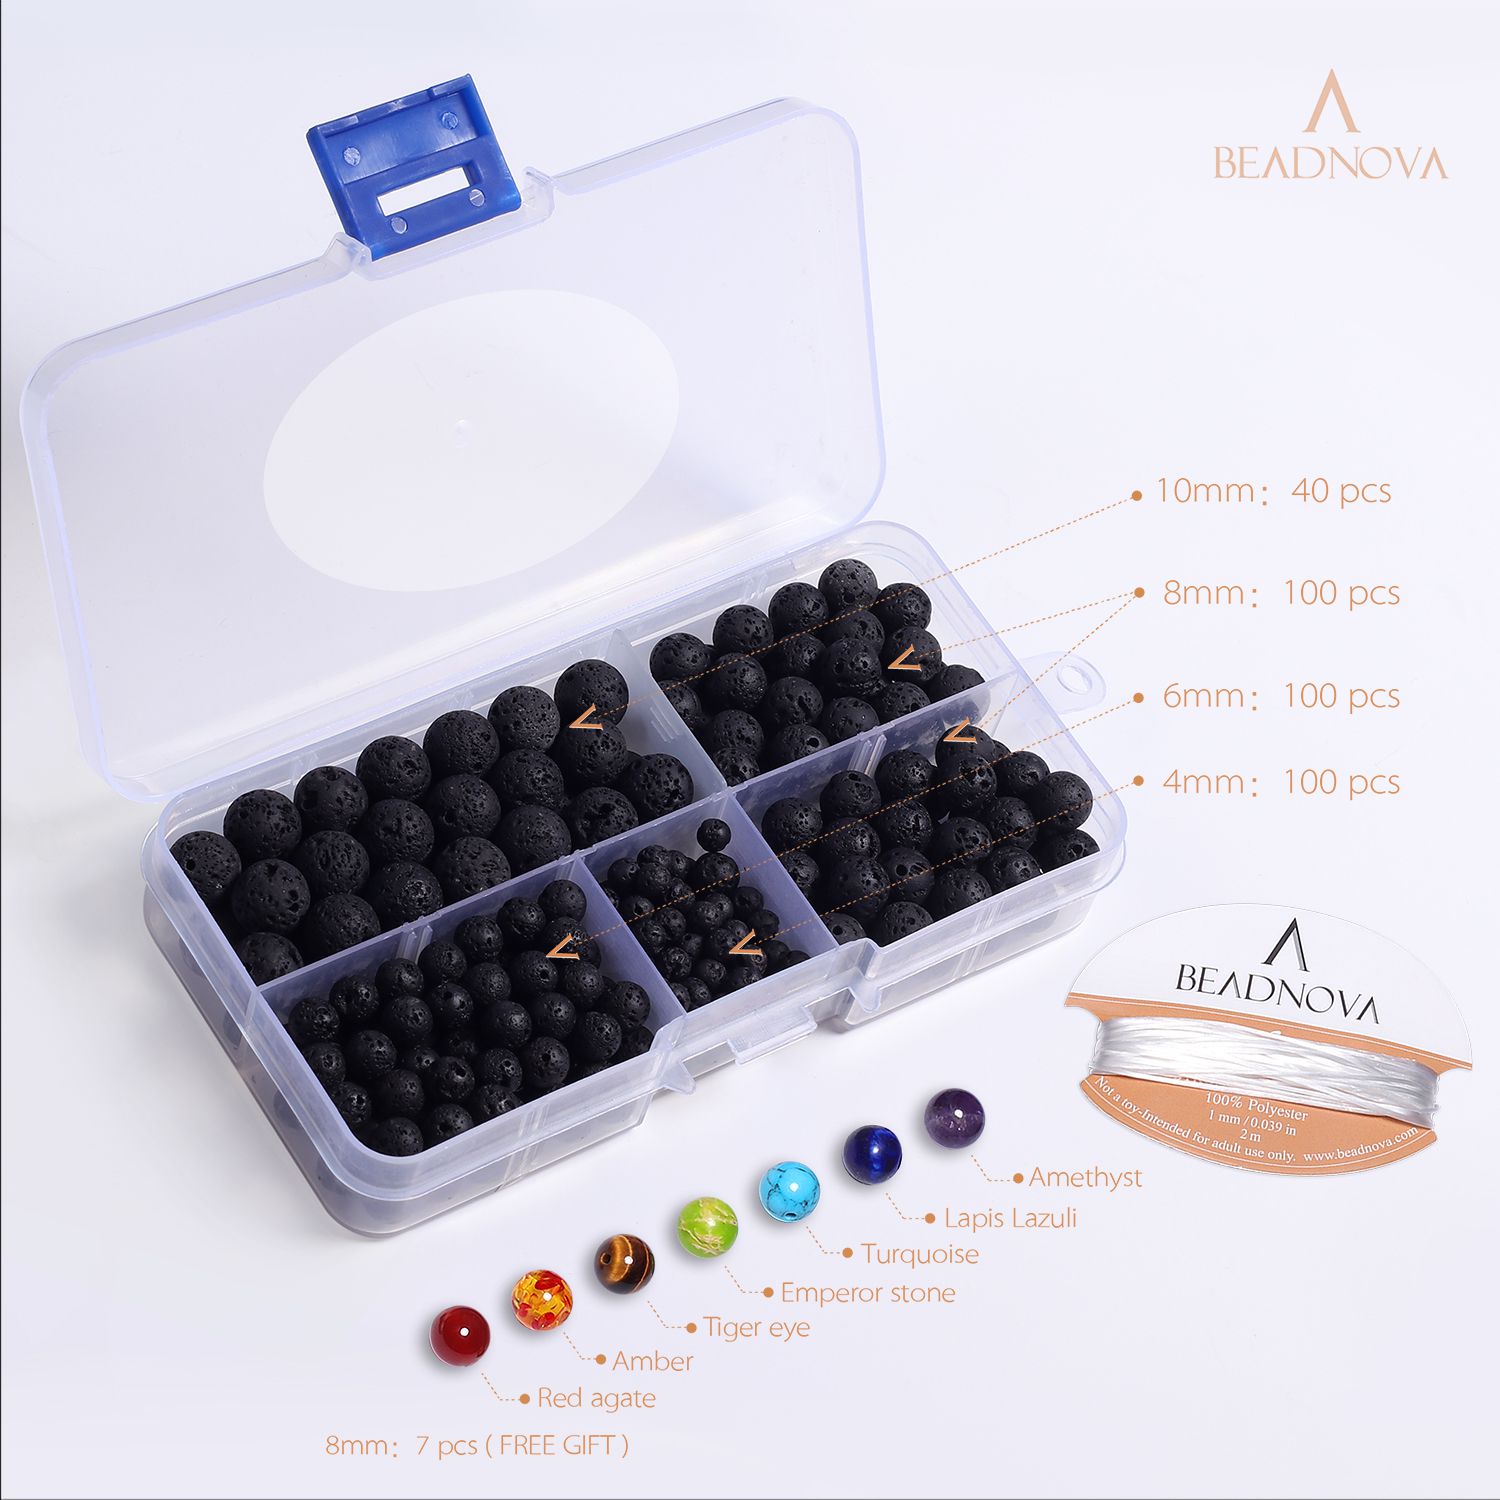 300pcs Black Lava Stone Round Loose Beads with Free Crystal String for Jewelry Making by Paxcoo